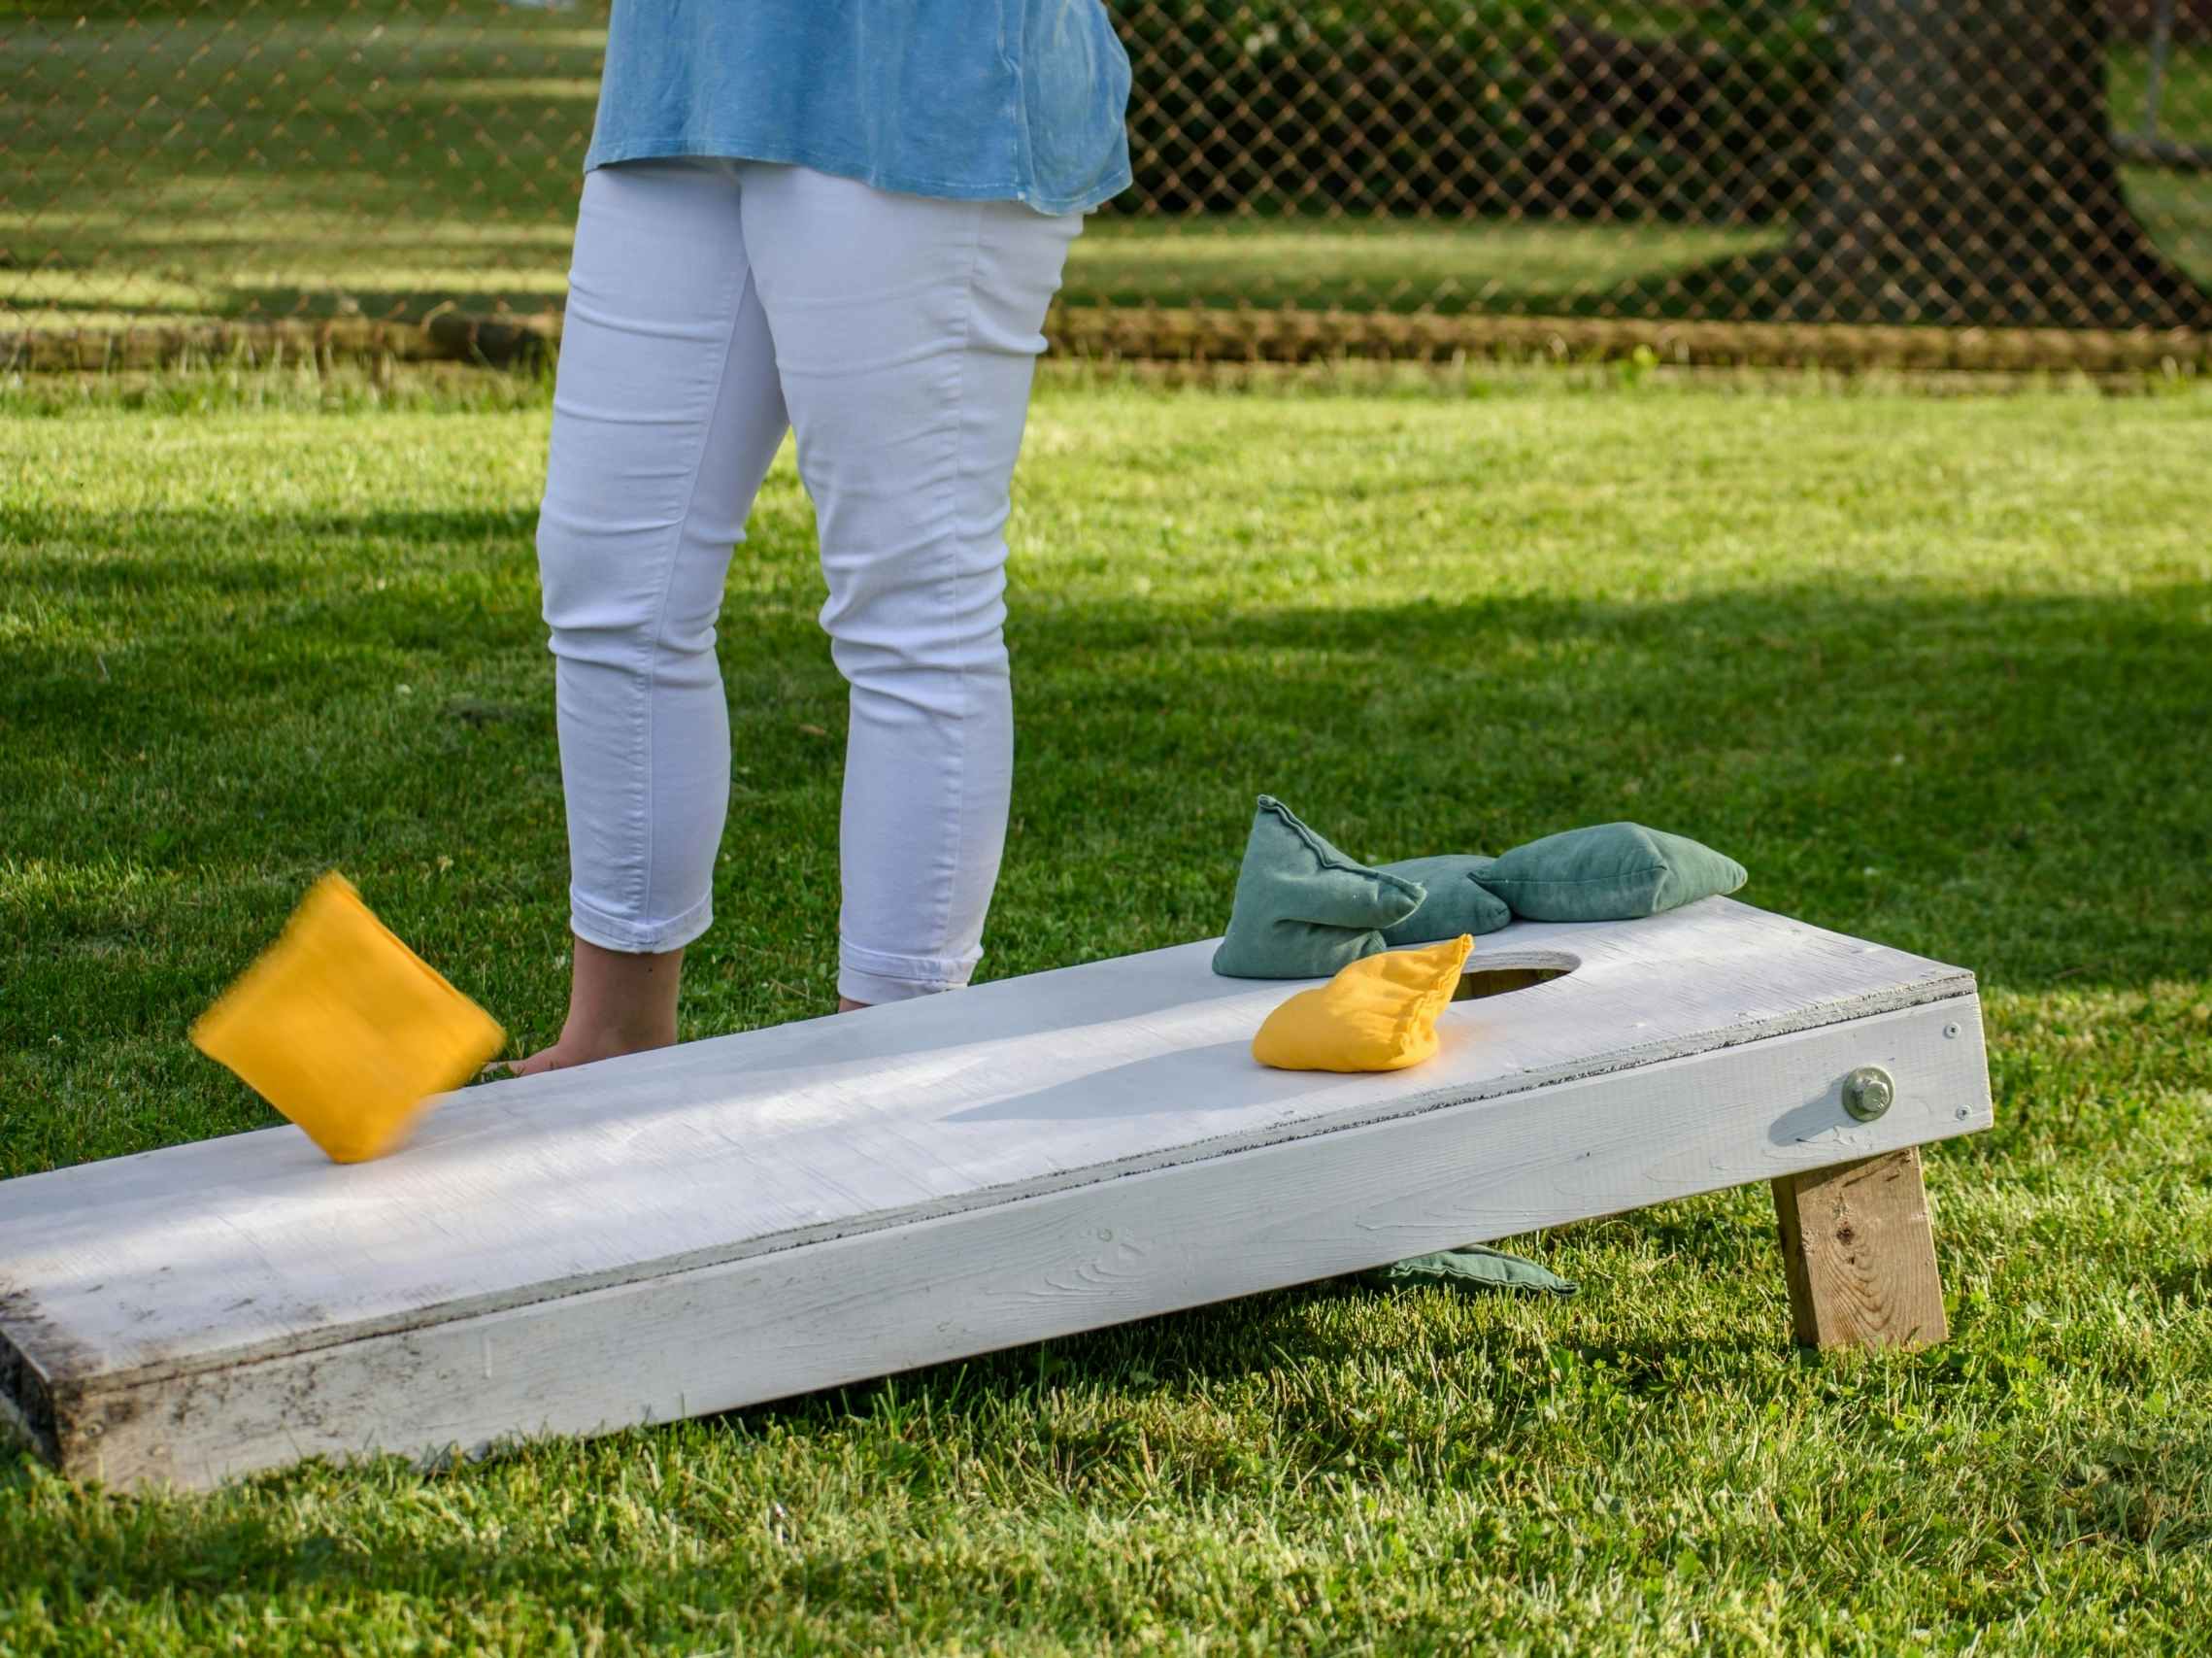 A person standing next to a cornhole board that has bean bags being tossed at it.